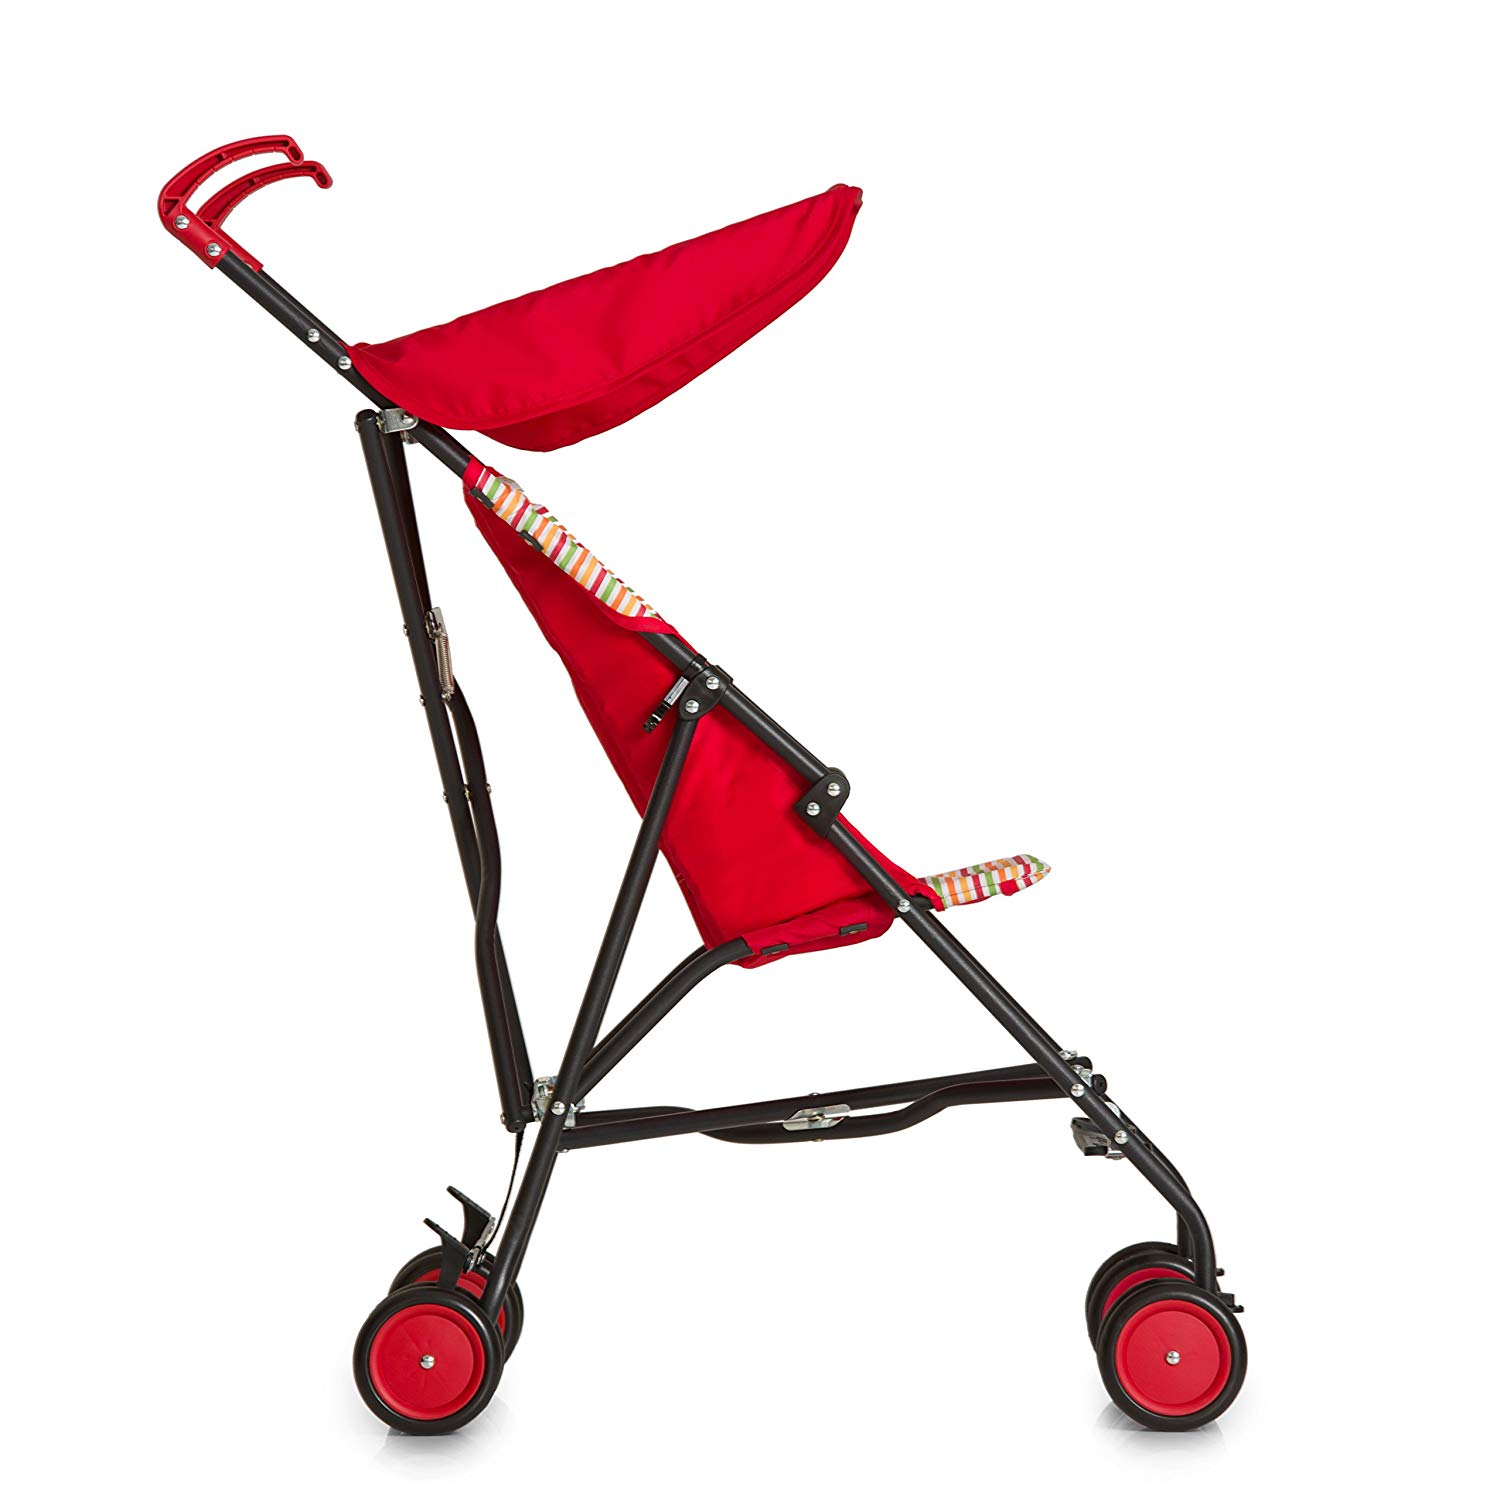 Hauck Sun Plus Disney Pooh Spring Brights Red Small Folding Pushchair for Children from 6 Months to 15 kg